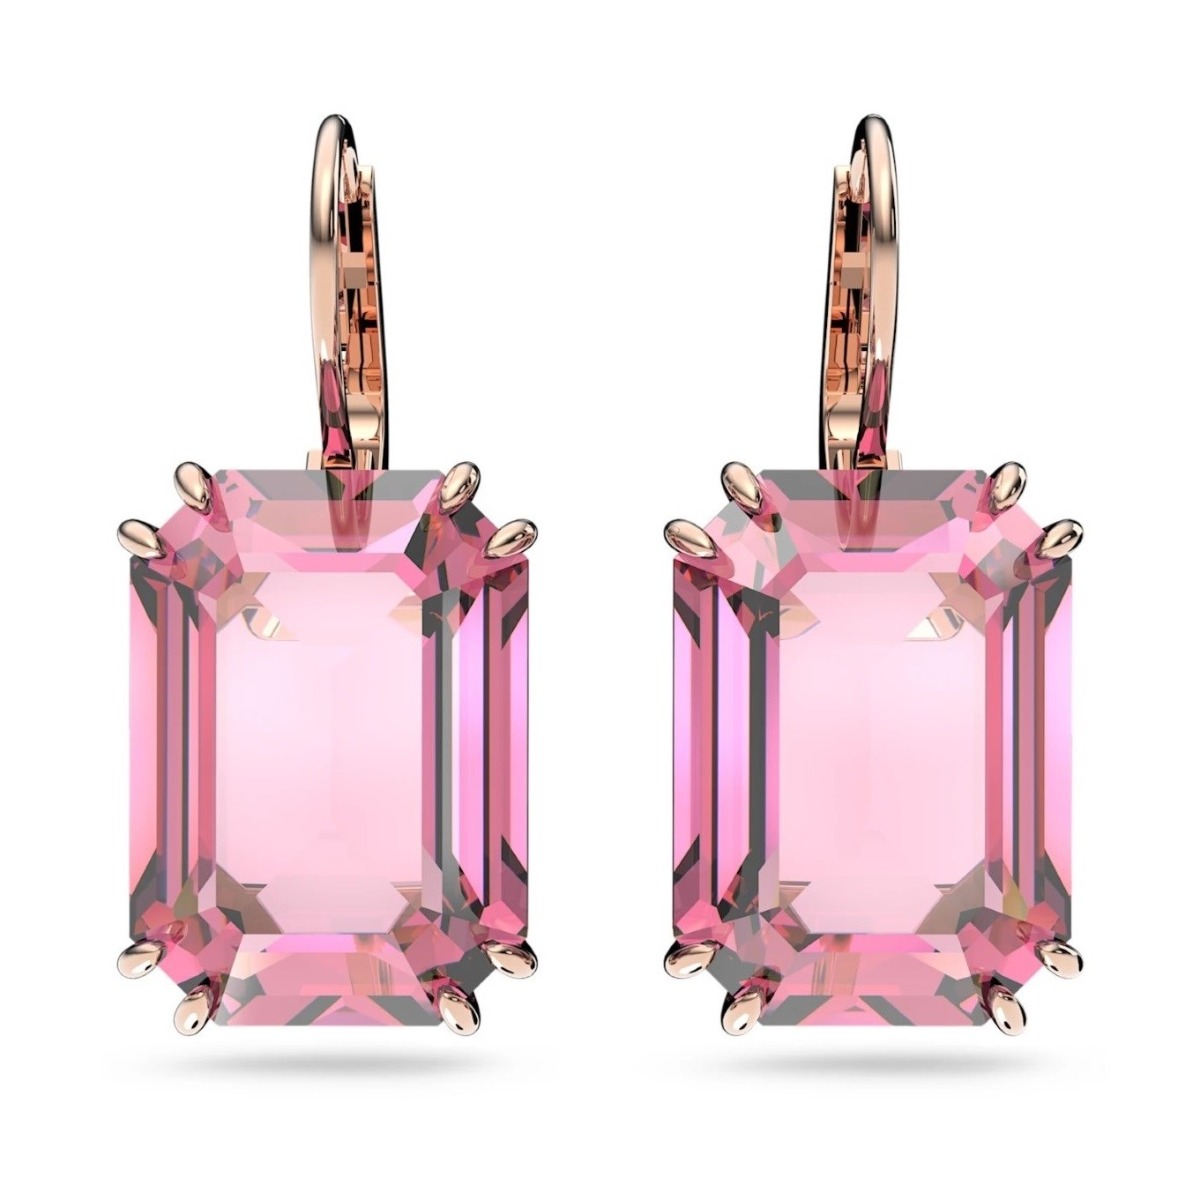 Swarovski Millenia Octagon Earrings - Pink with Rose Gold Plating 5619502